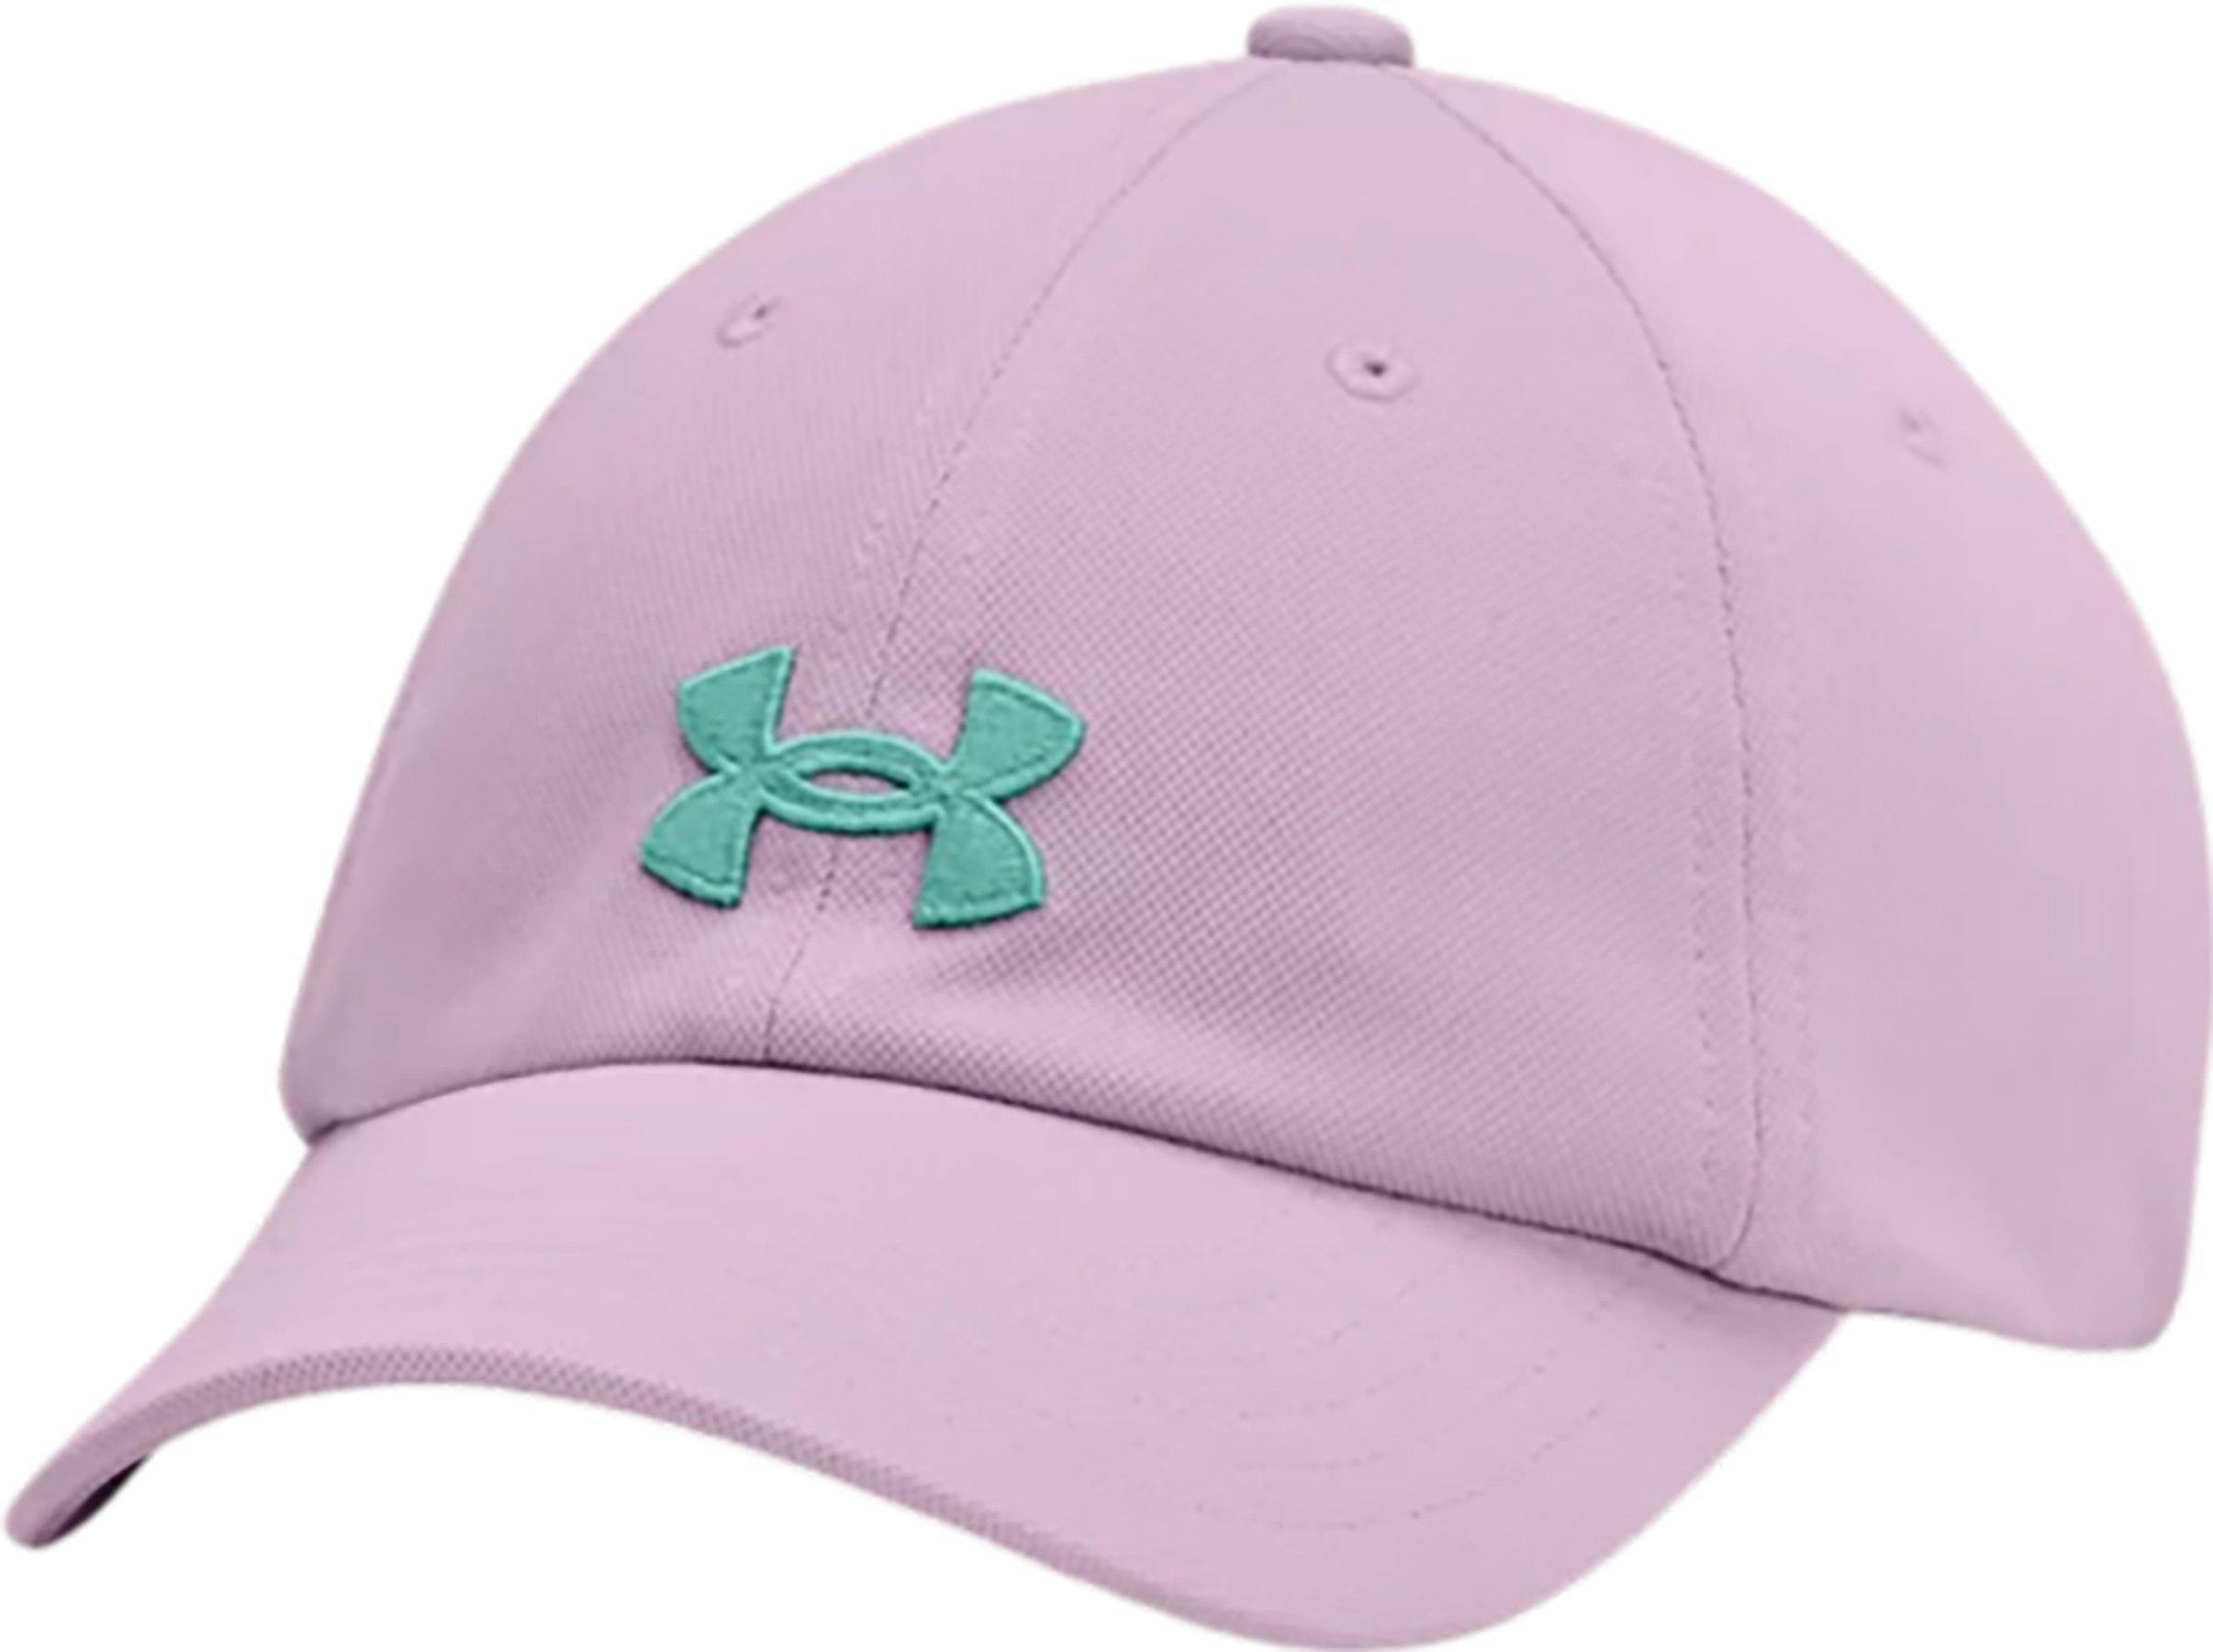 Product image for Blitzing Adjustable Hat - Girls